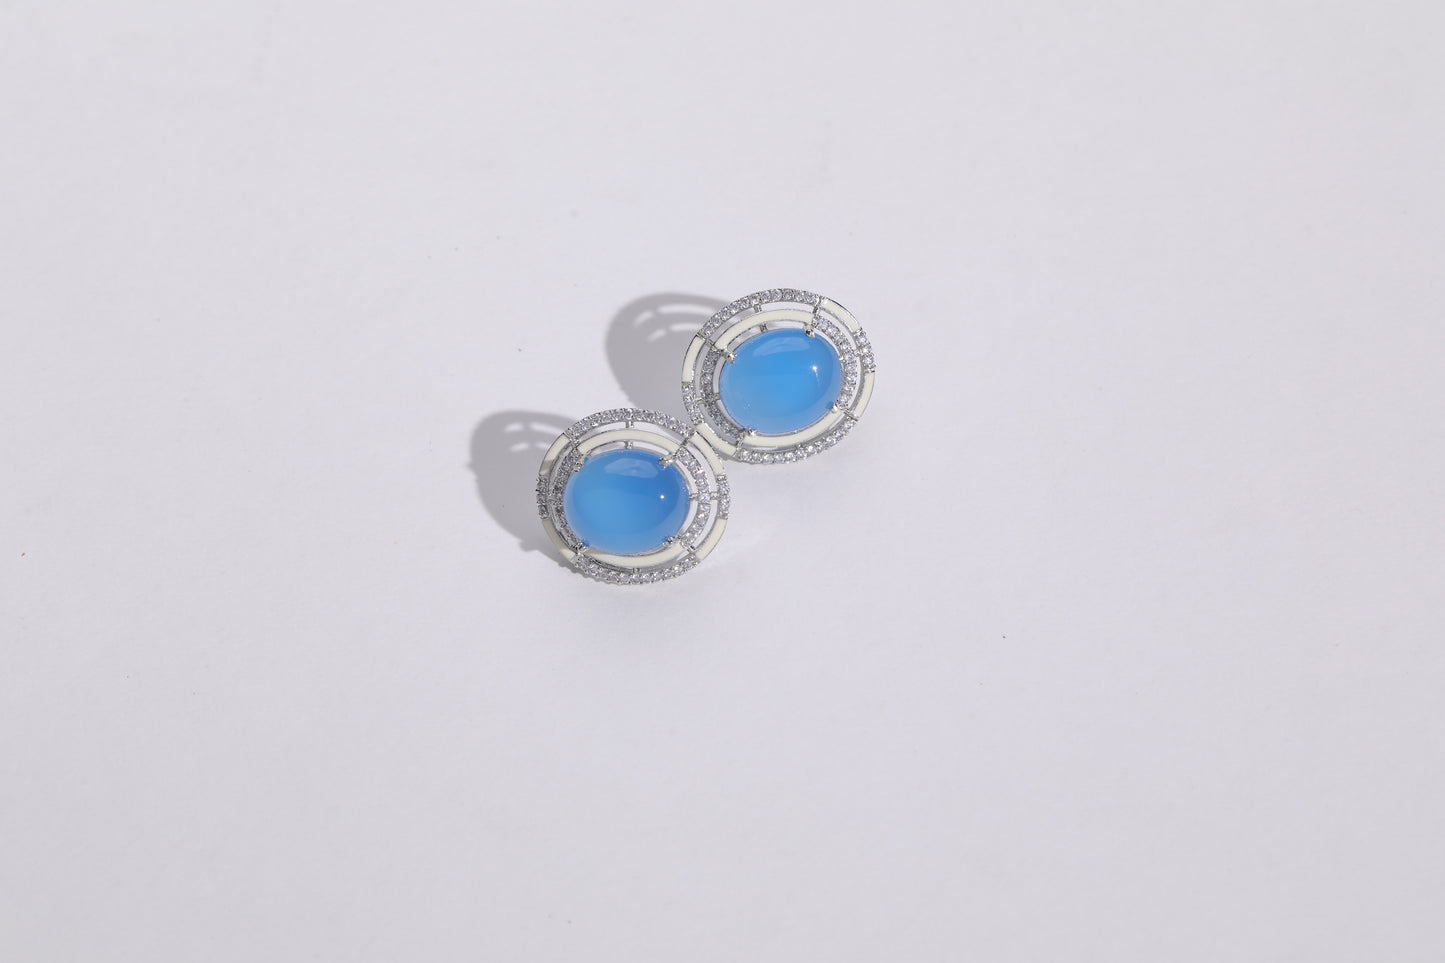 Classic Blue Stone Earrings: Versatile stud earrings for women, perfect for all occasions. Crafted with precision and elegance